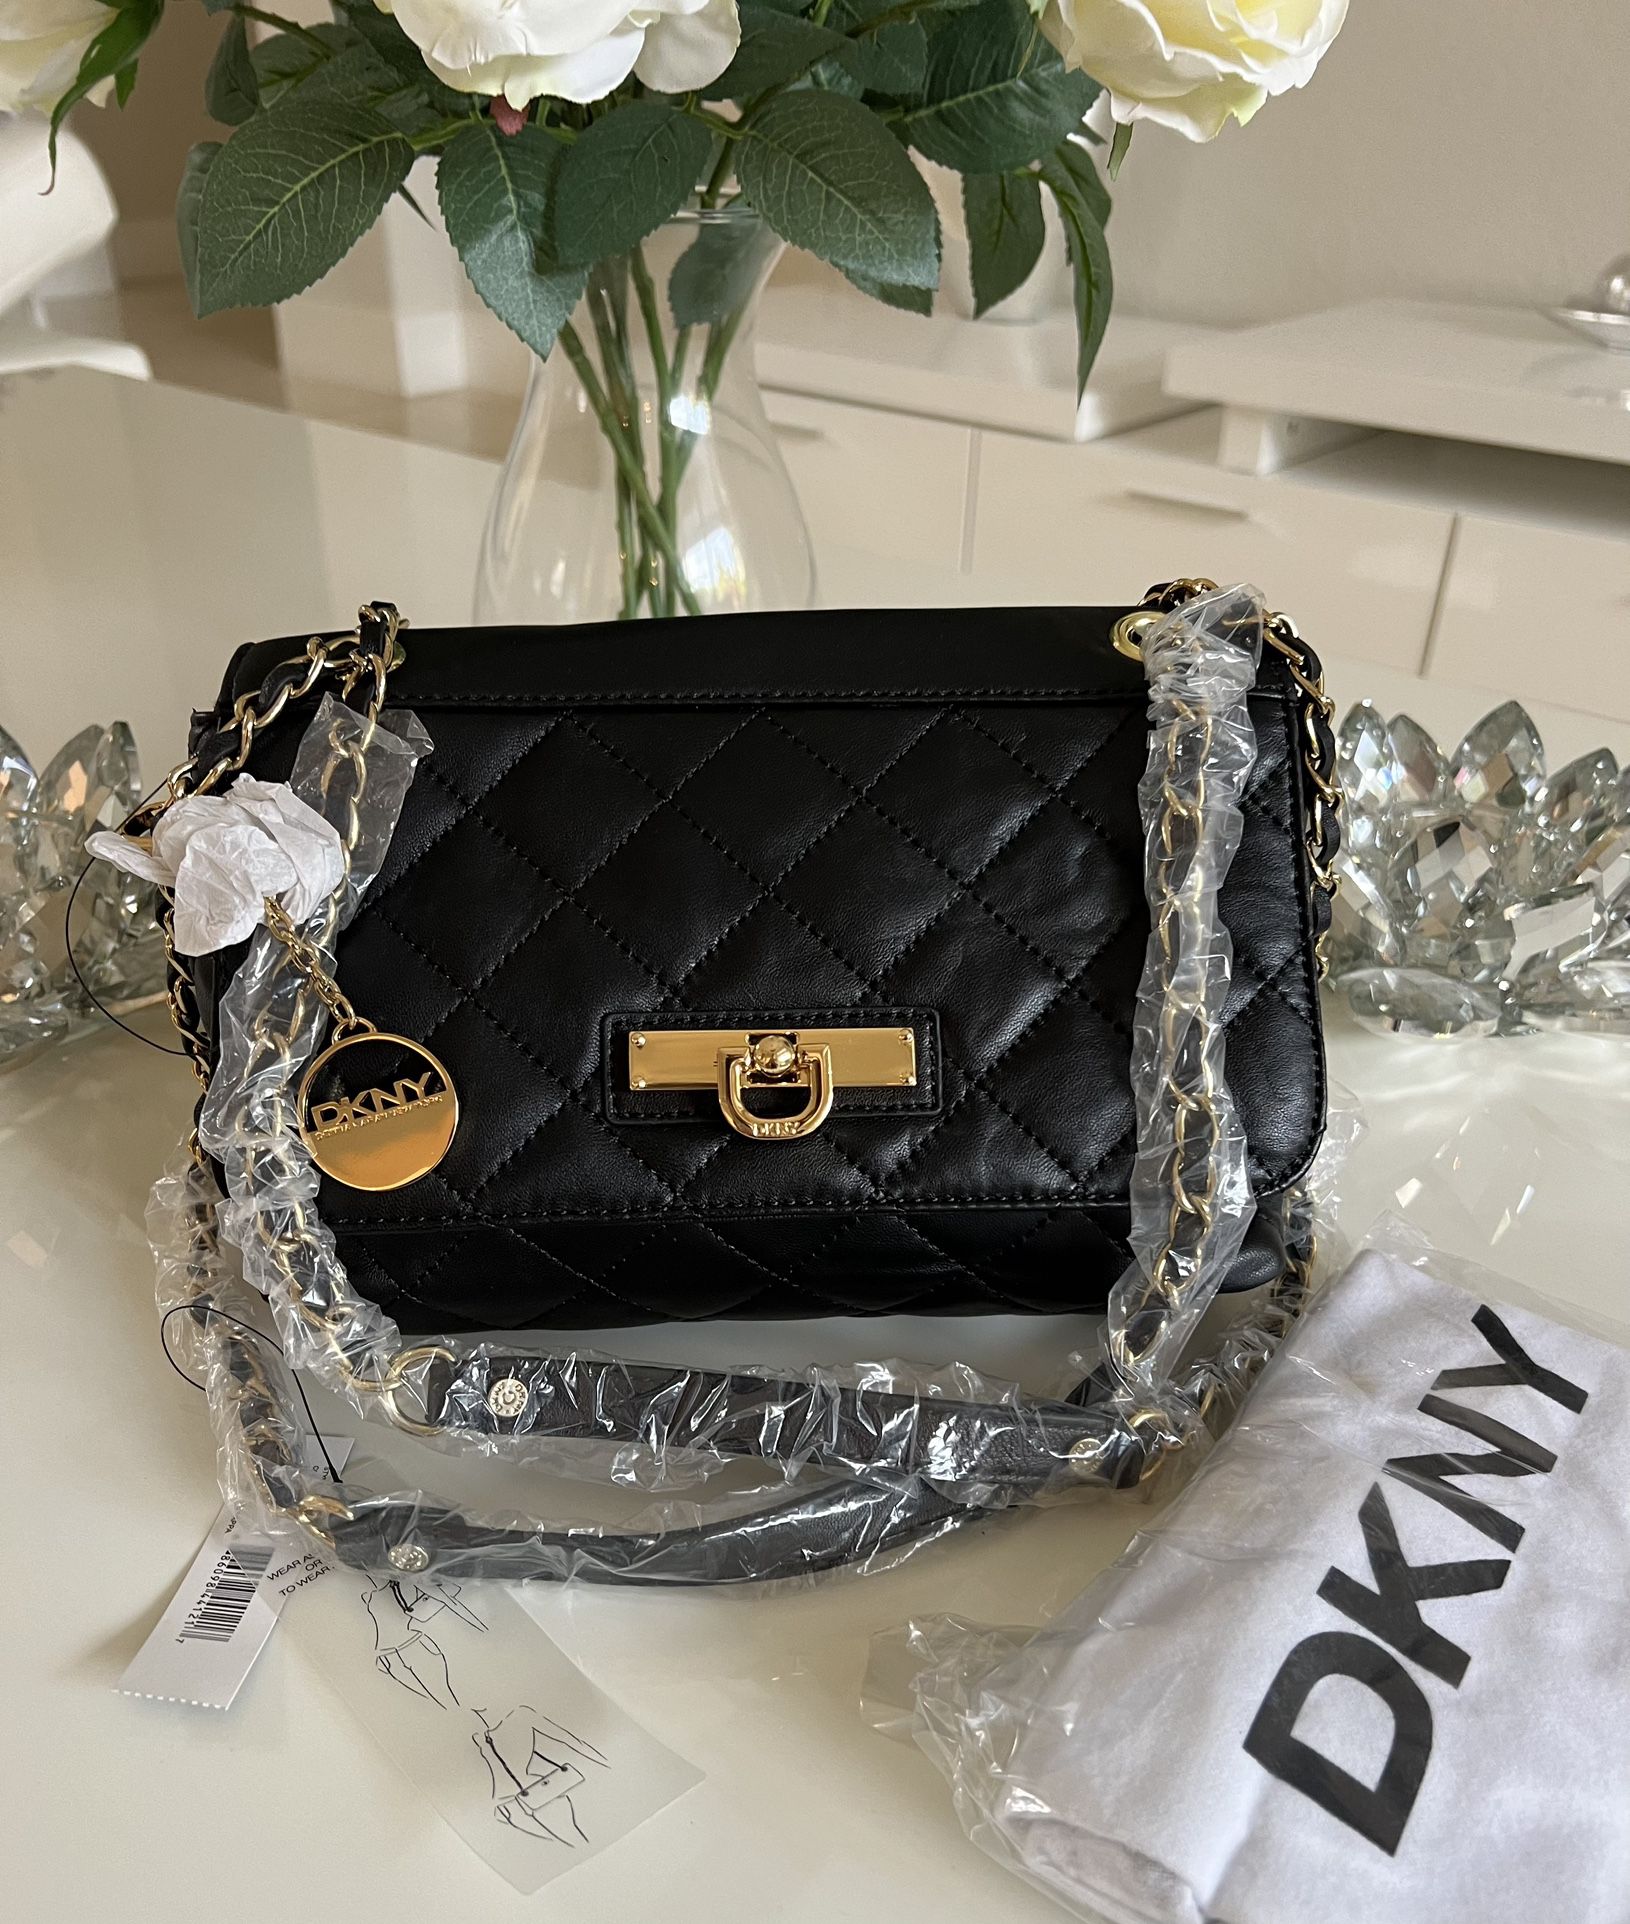 New With Tags Fashion DKNY Bag Limited